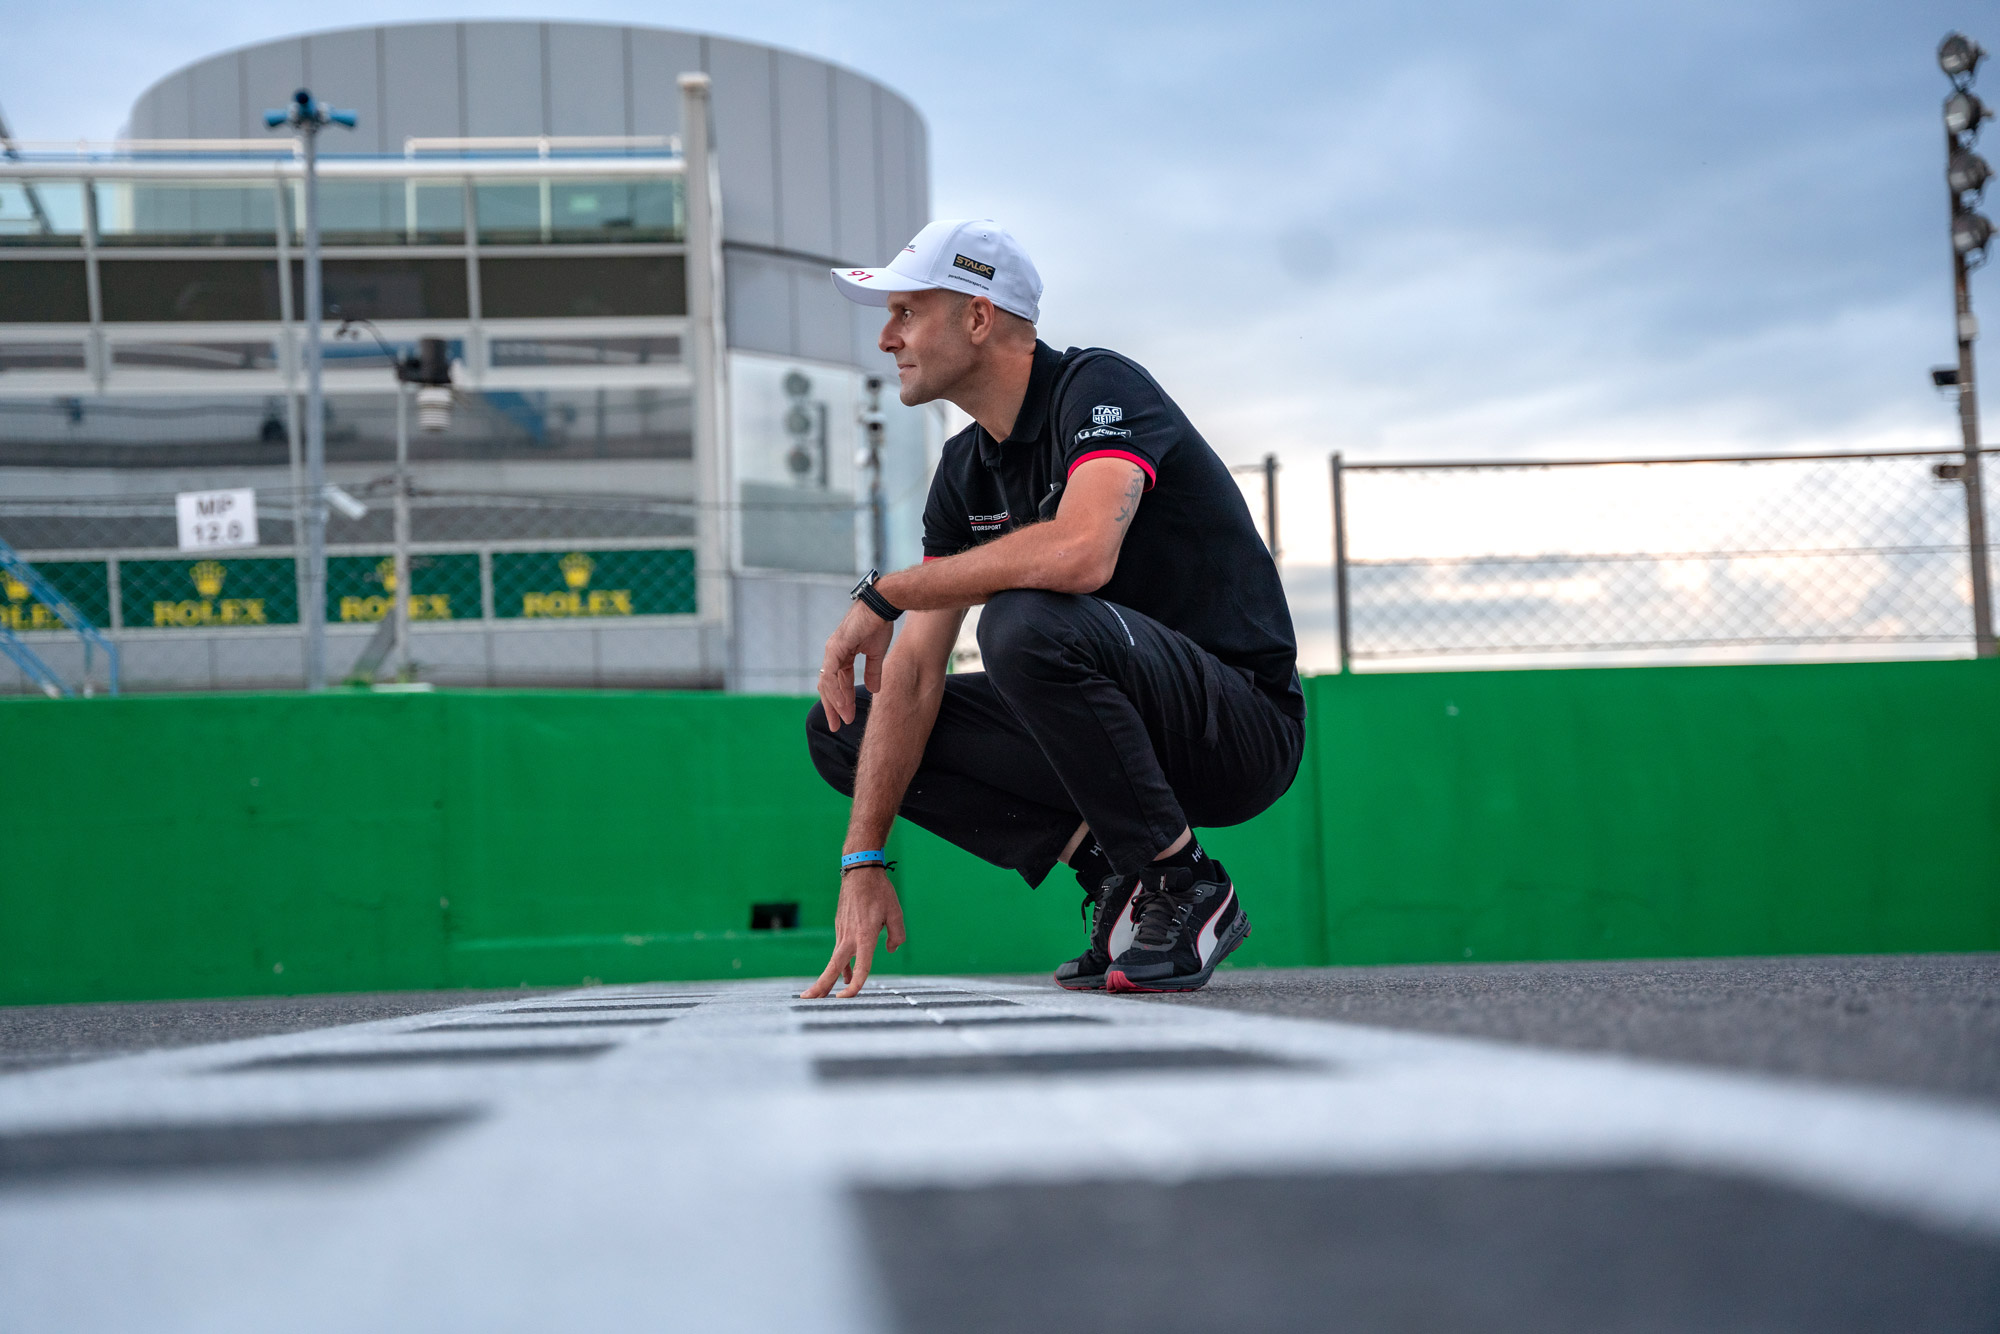 A man crouches at the start-finish straight in Monza